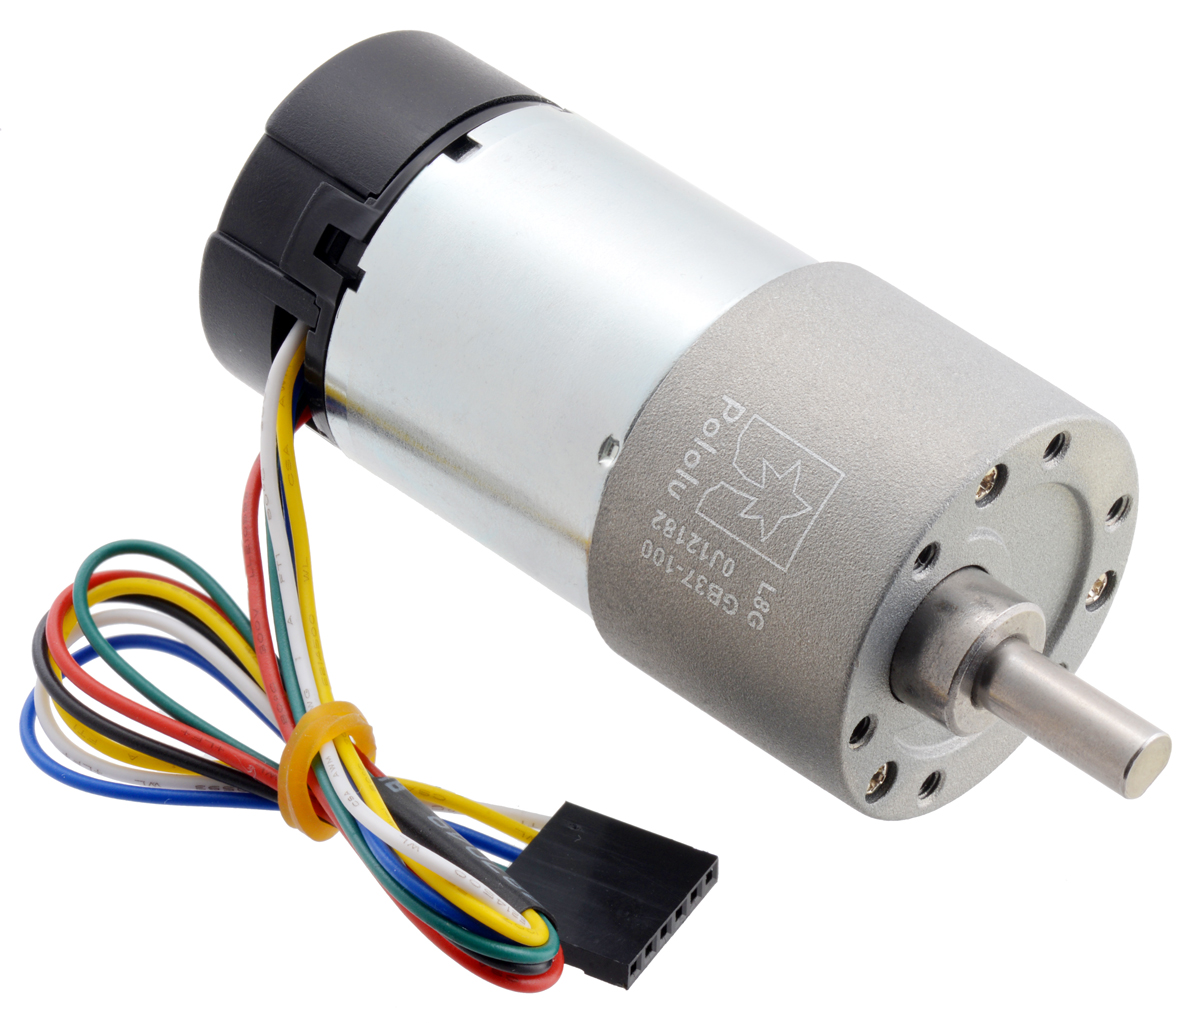 24V Motor with 64 CPR Encoder for 37D mm Metal Gearmotors (No Gearbox,  Helical Pinion)